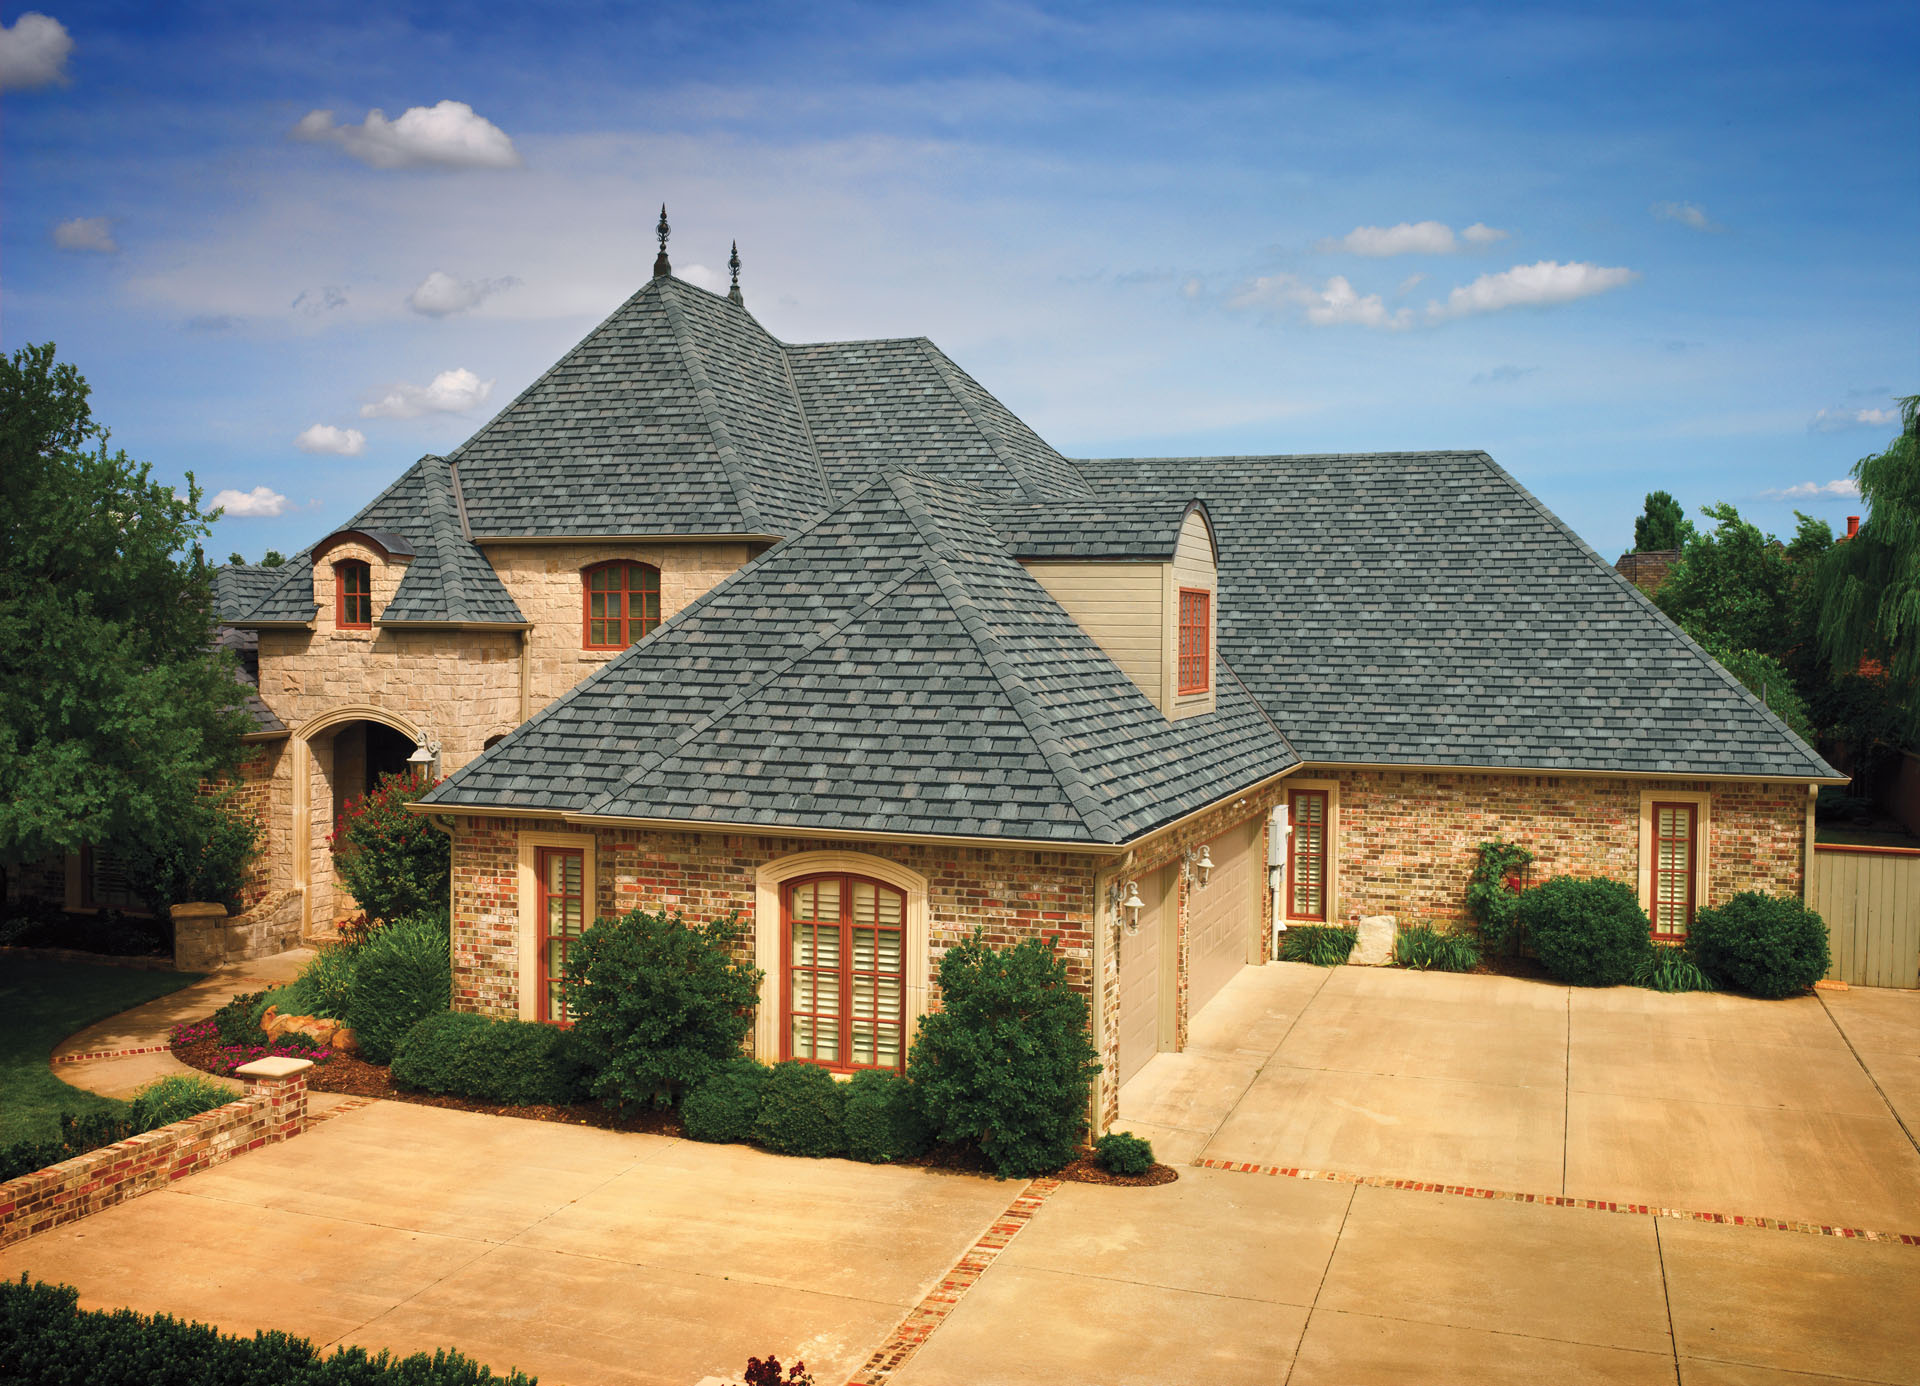 A large home with a new roof.